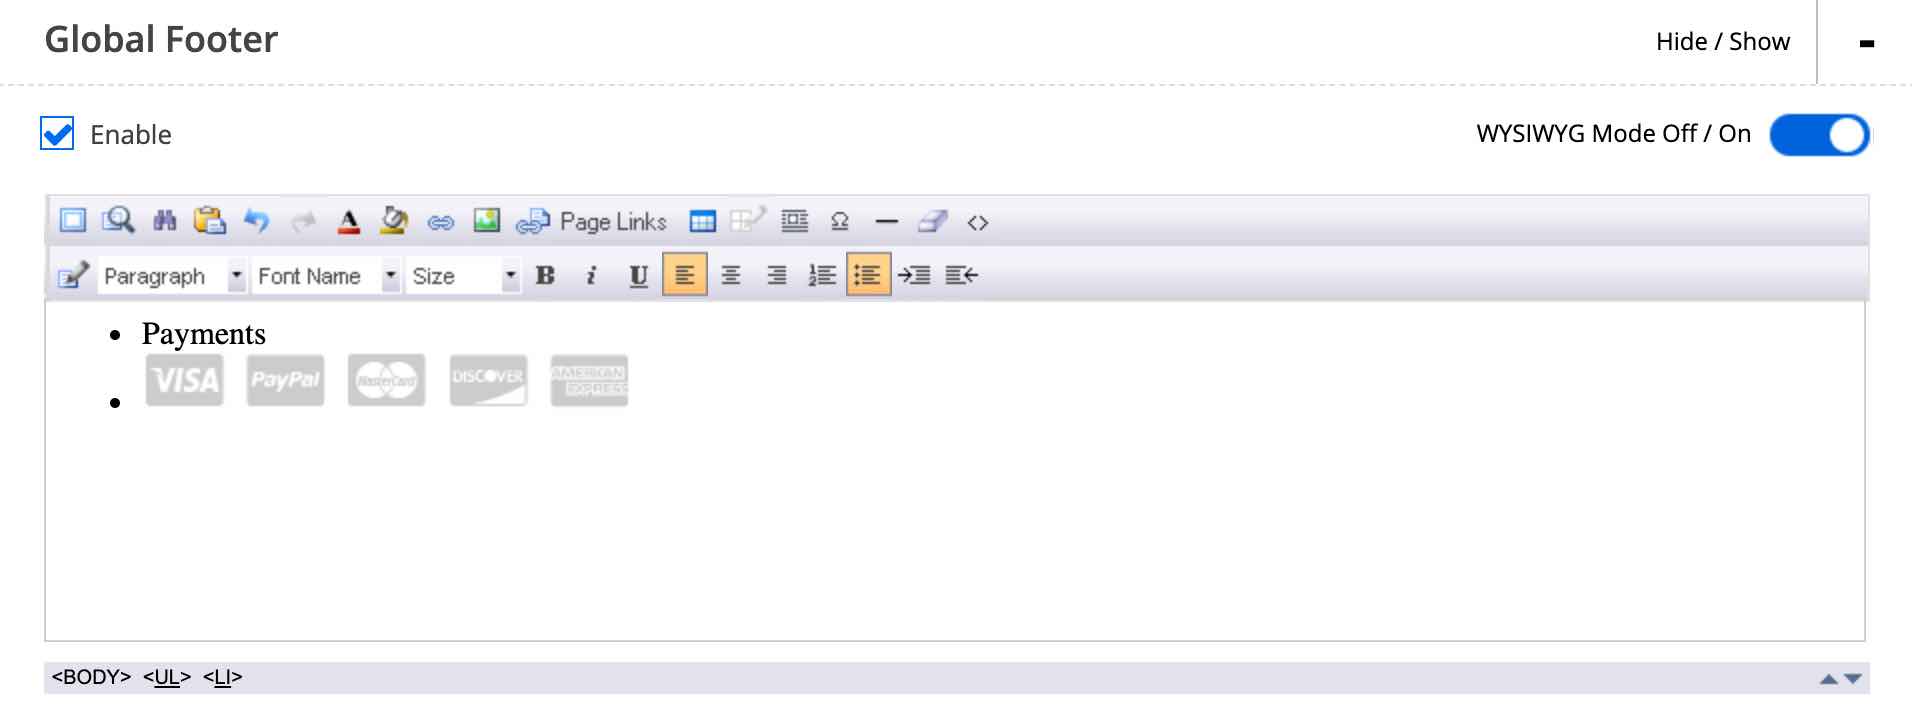 Global footer editor text box in Shift4Shop with enable checked off